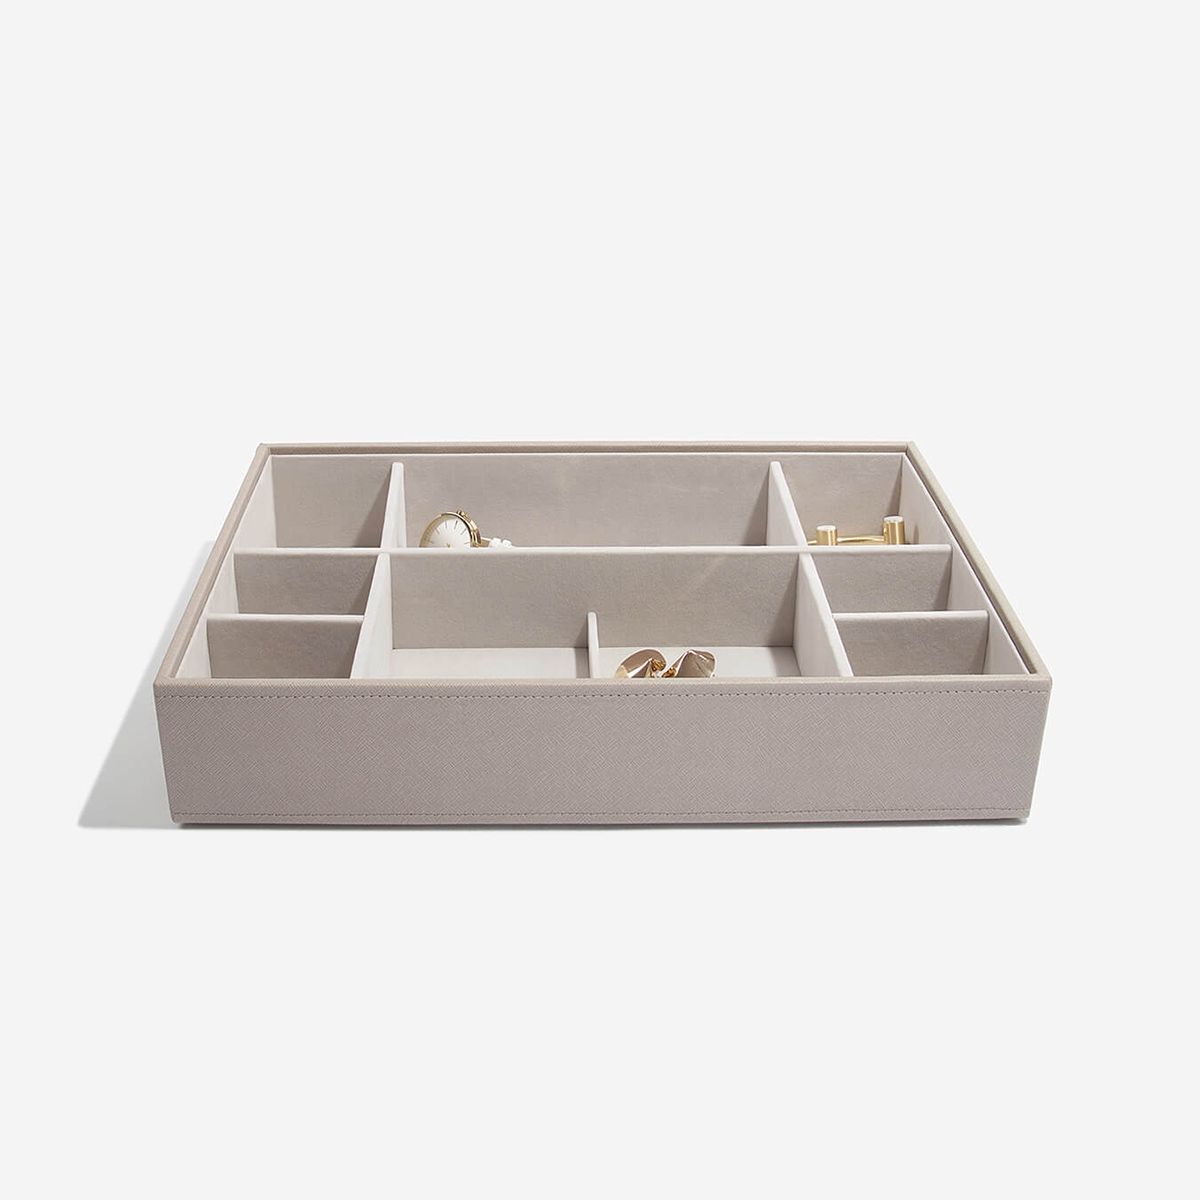 Deep 11-Section Tray | The Container Store